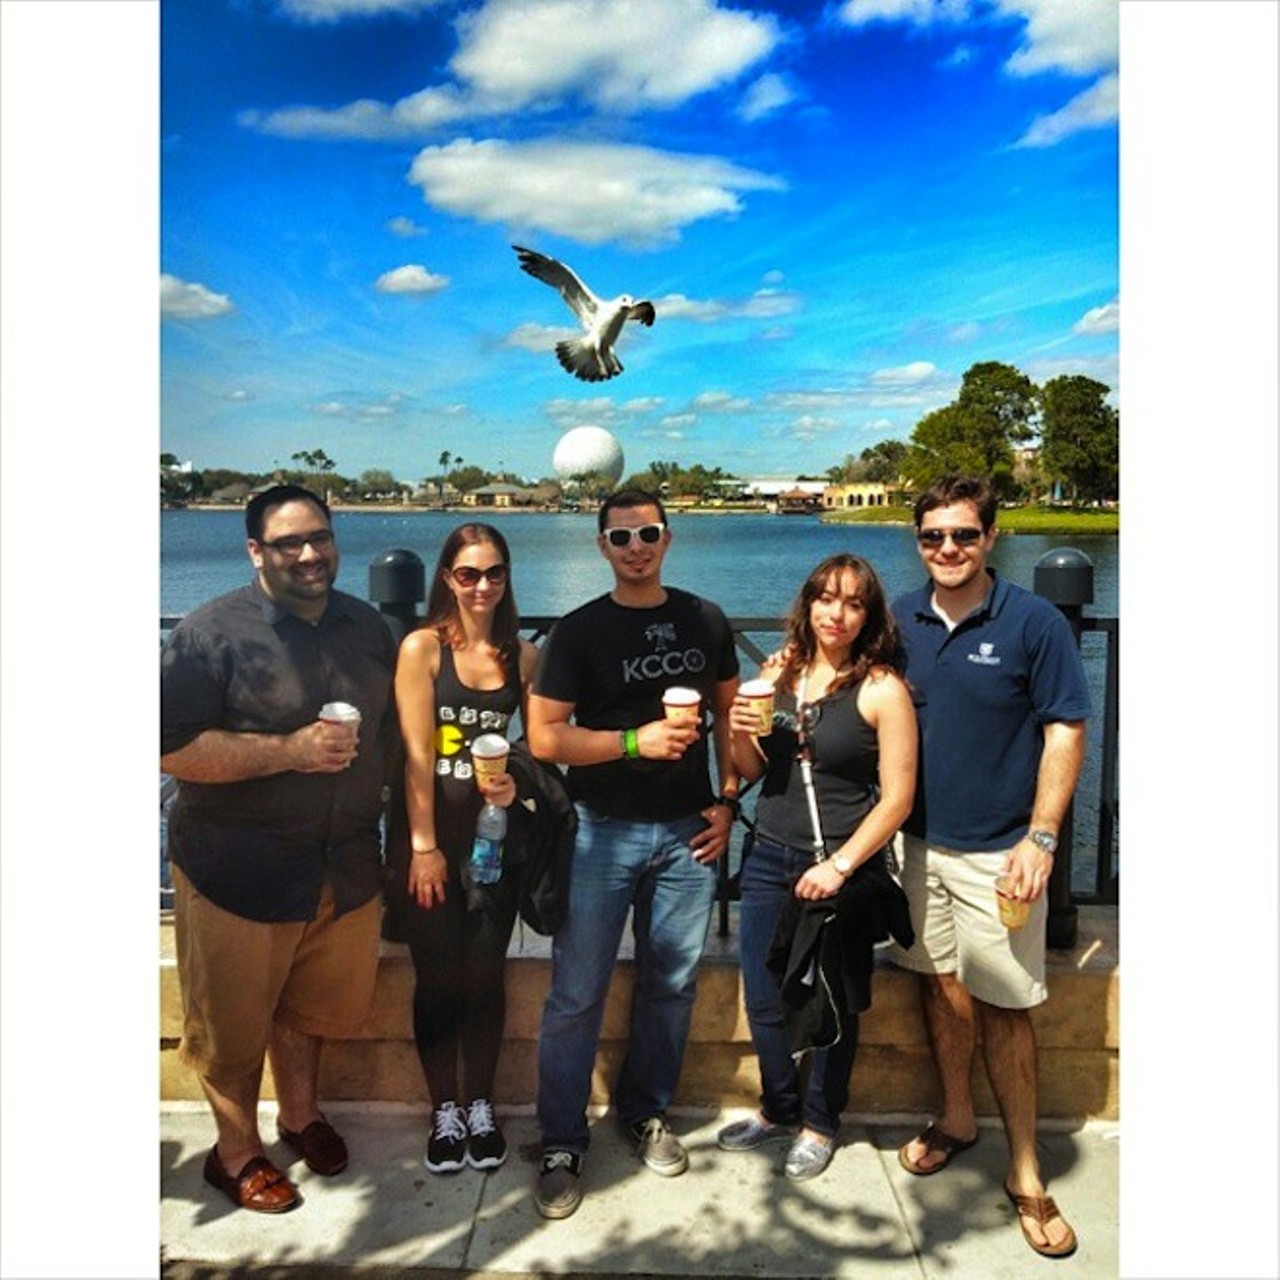 Epcot Day via norwing_r on Instagram